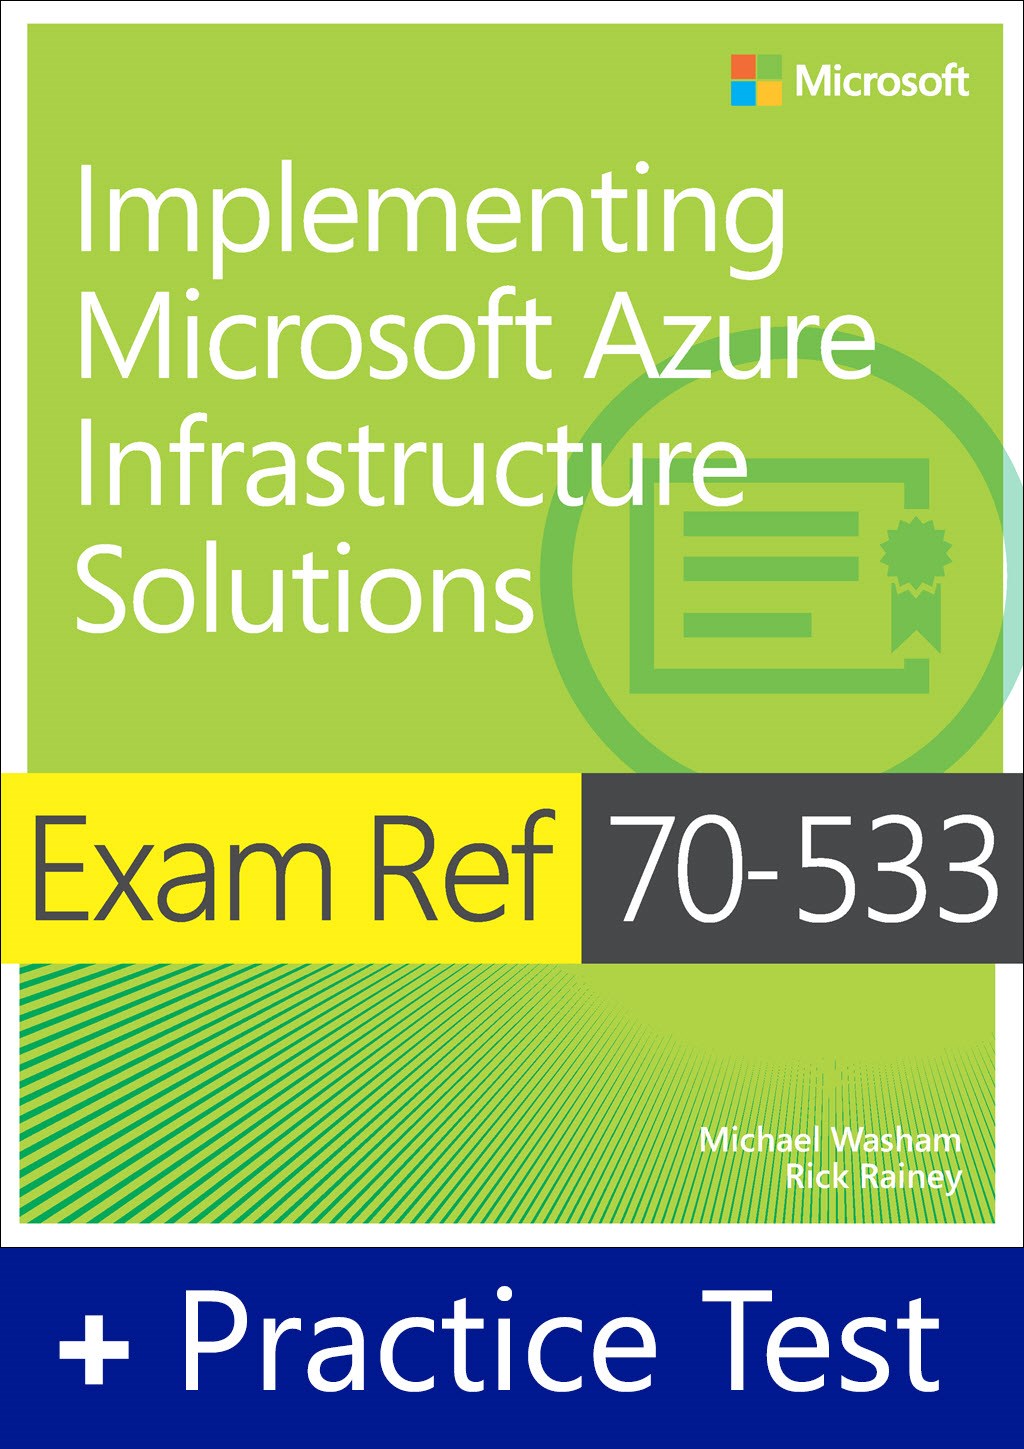 Exam Ref 70-533 Implementing Microsoft Azure Infrastructure Solutions with Practice Test Access